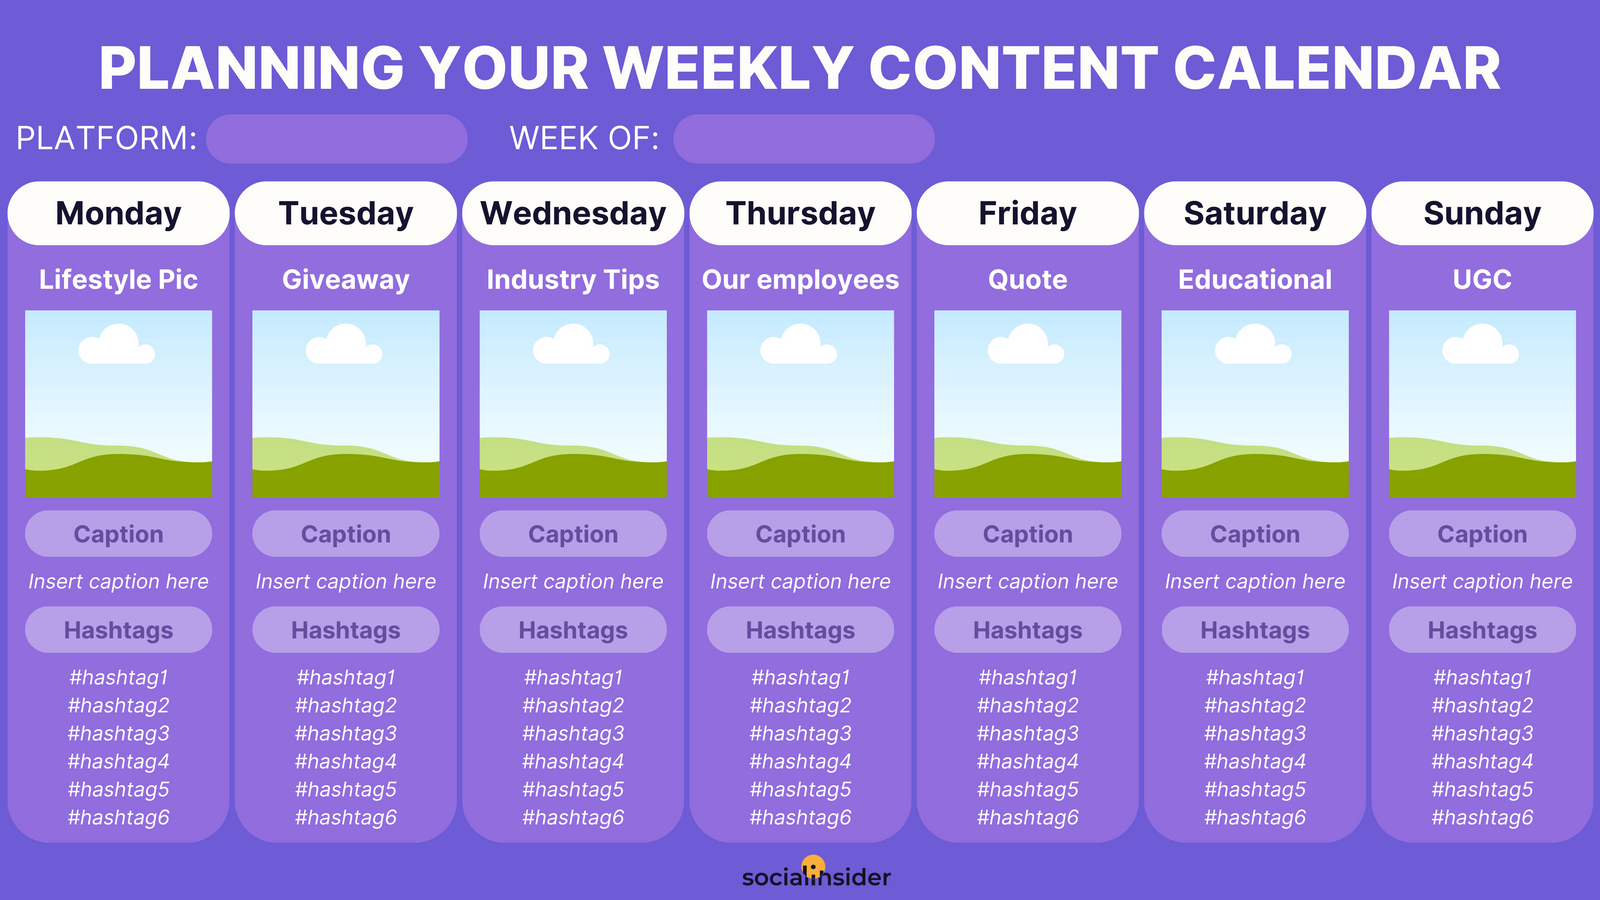 visual with a purple background showing how to plan your weekly content calendar